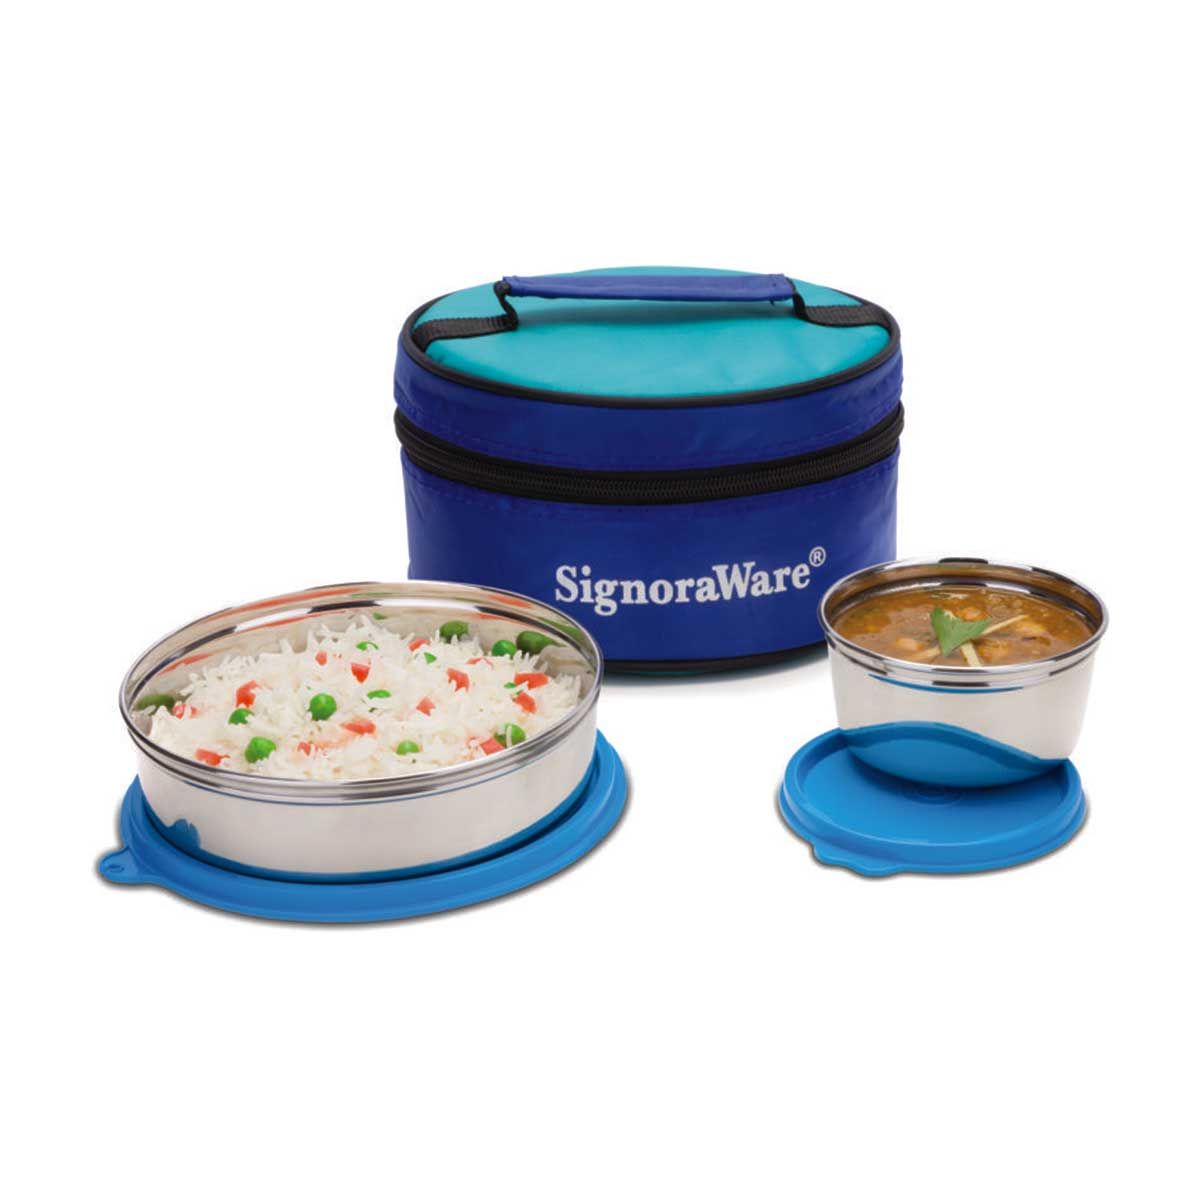 Signoraware Classic Steel Stainless Steel Lunch Box with Bag